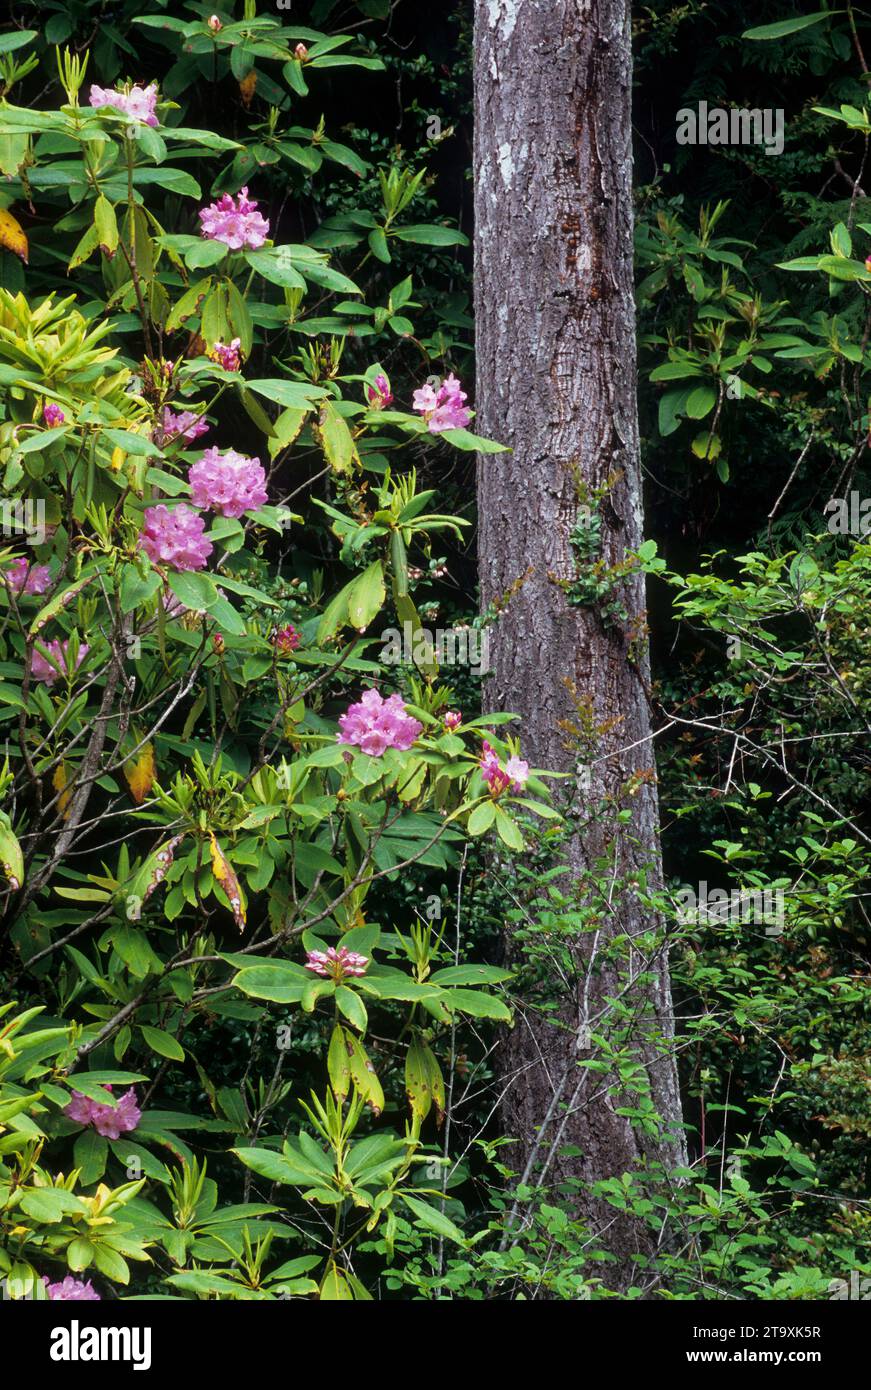 Pacific rhododendron (Rhododendron macrophyllum) along Sutton Creek Trail, Siuslaw National Forest, Oregon Stock Photo